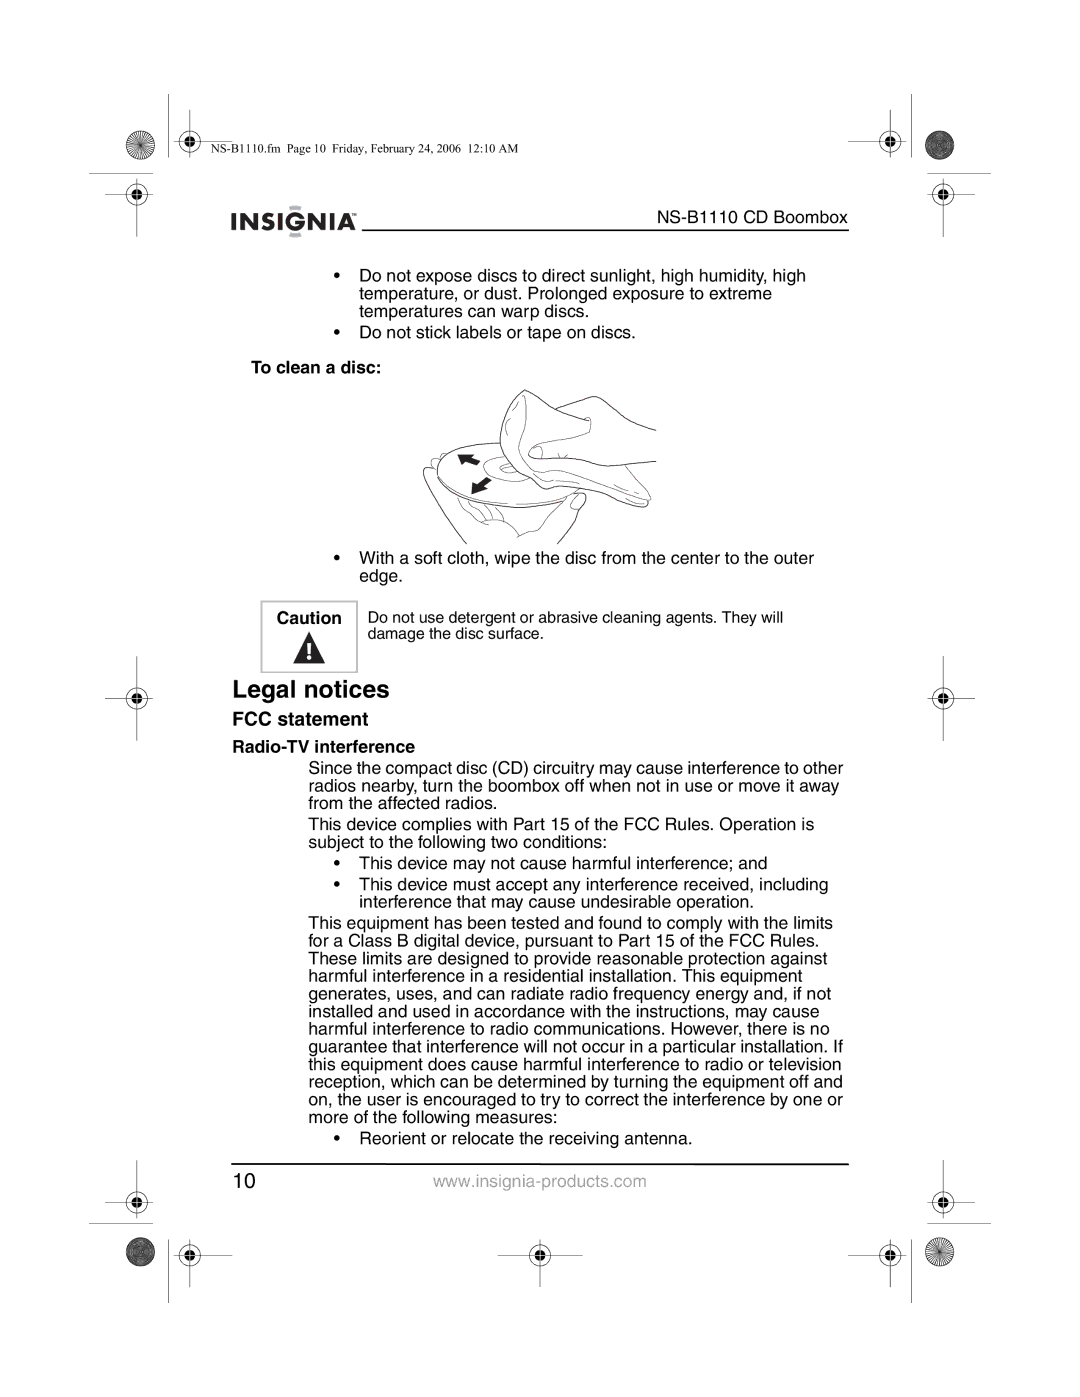 Insignia NS-B1110 manual Legal notices, FCC statement, To clean a disc, Radio-TV interference 